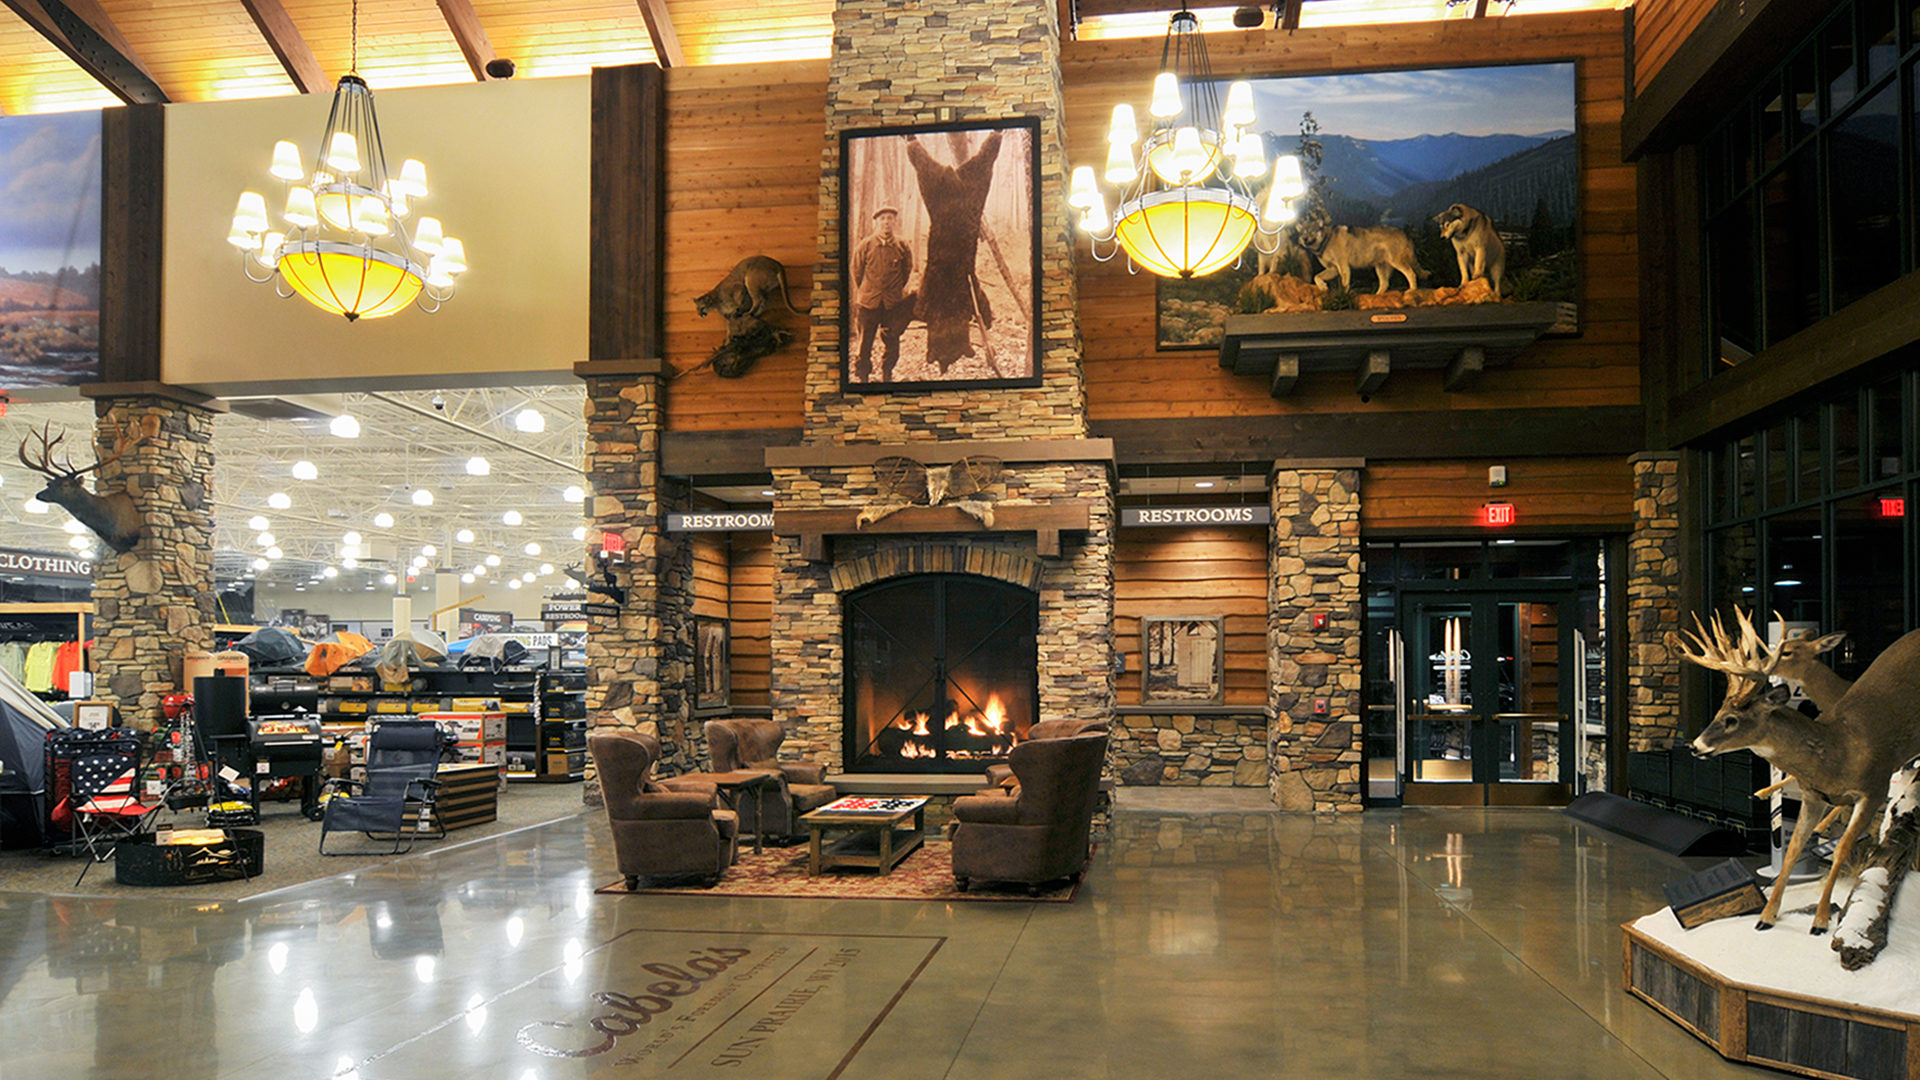 Testimonial Cabelas Retail Center Sun Prairie WI Interior Lobby Seating Area With Leather Chairs in Front of Fireplace